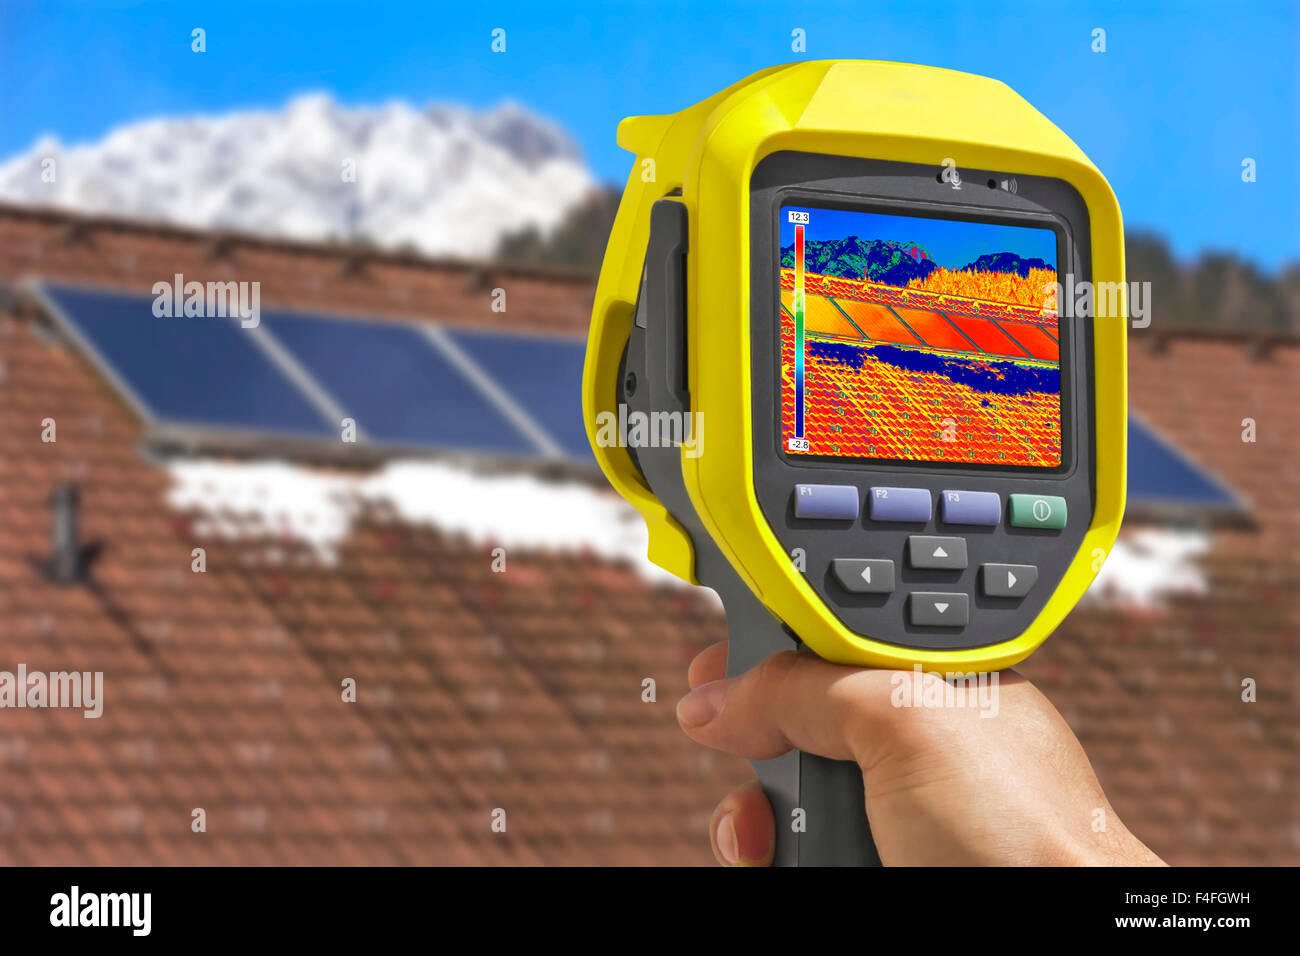 Recording Photovoltaic Solar Panels on the roof House With Thermal Camera Stock Photo